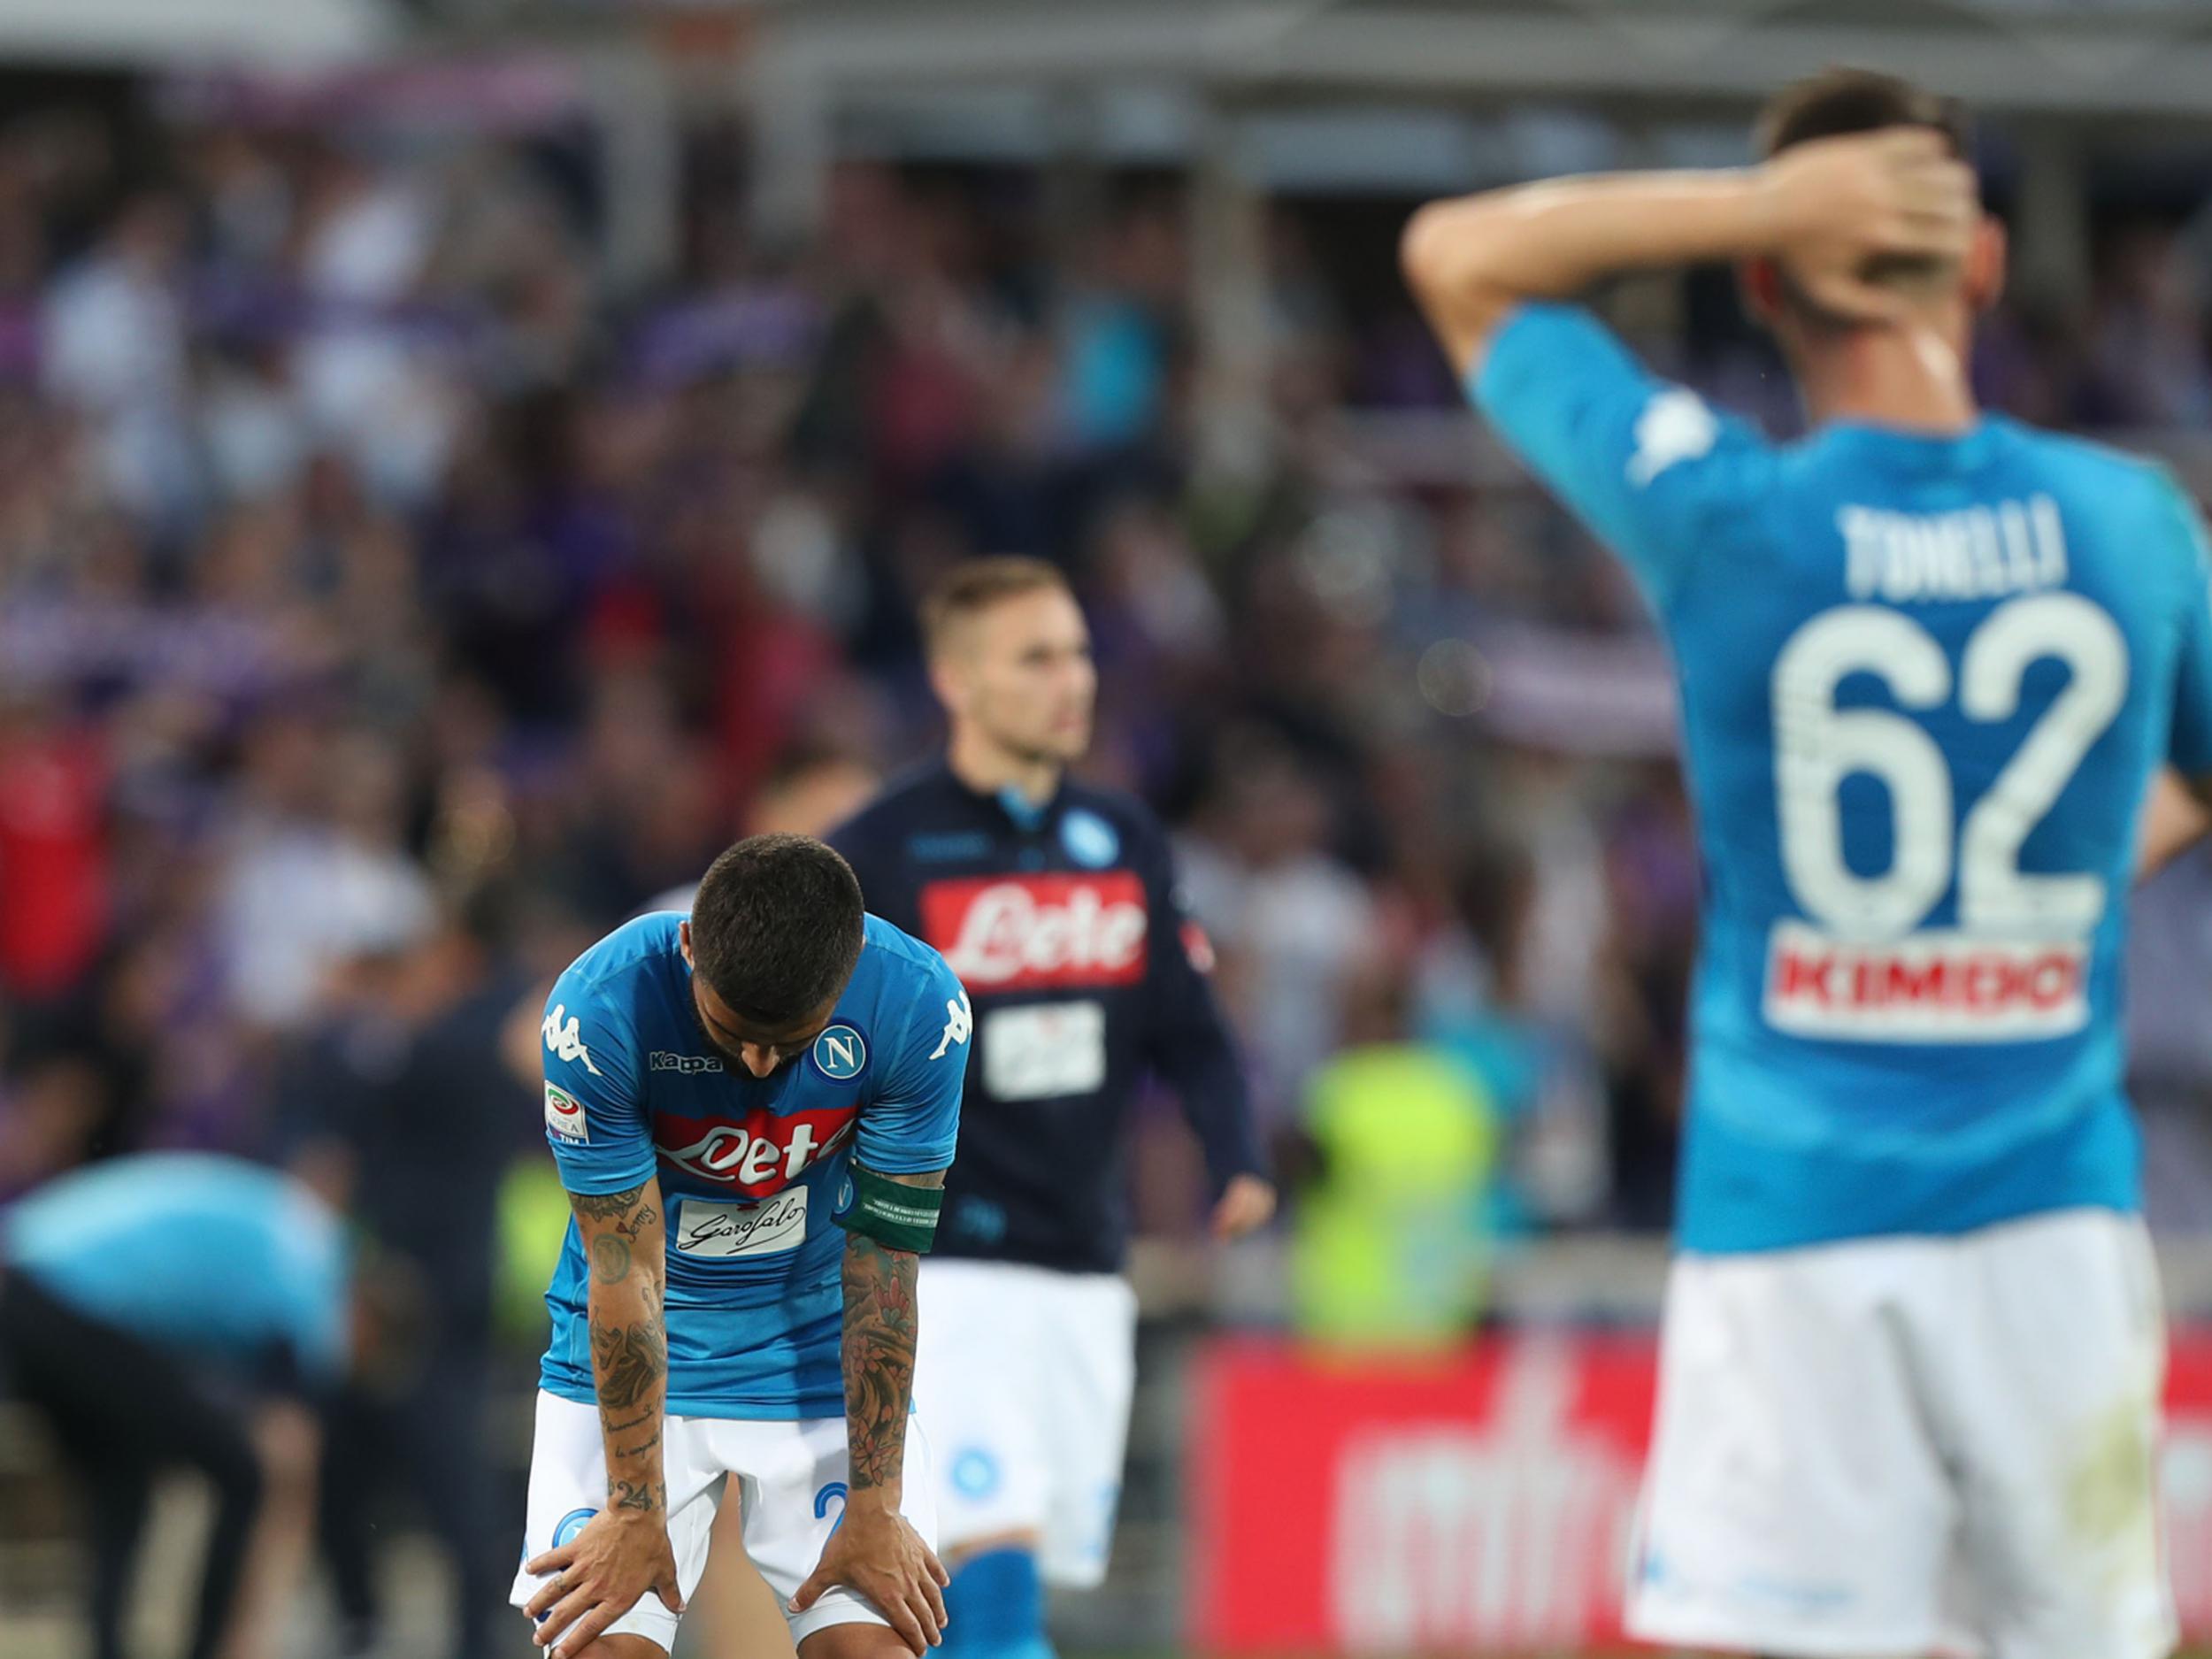 Napoli suffered a shock defeat against Fiorentina, leaving them four points adrift of Juventus in Serie A